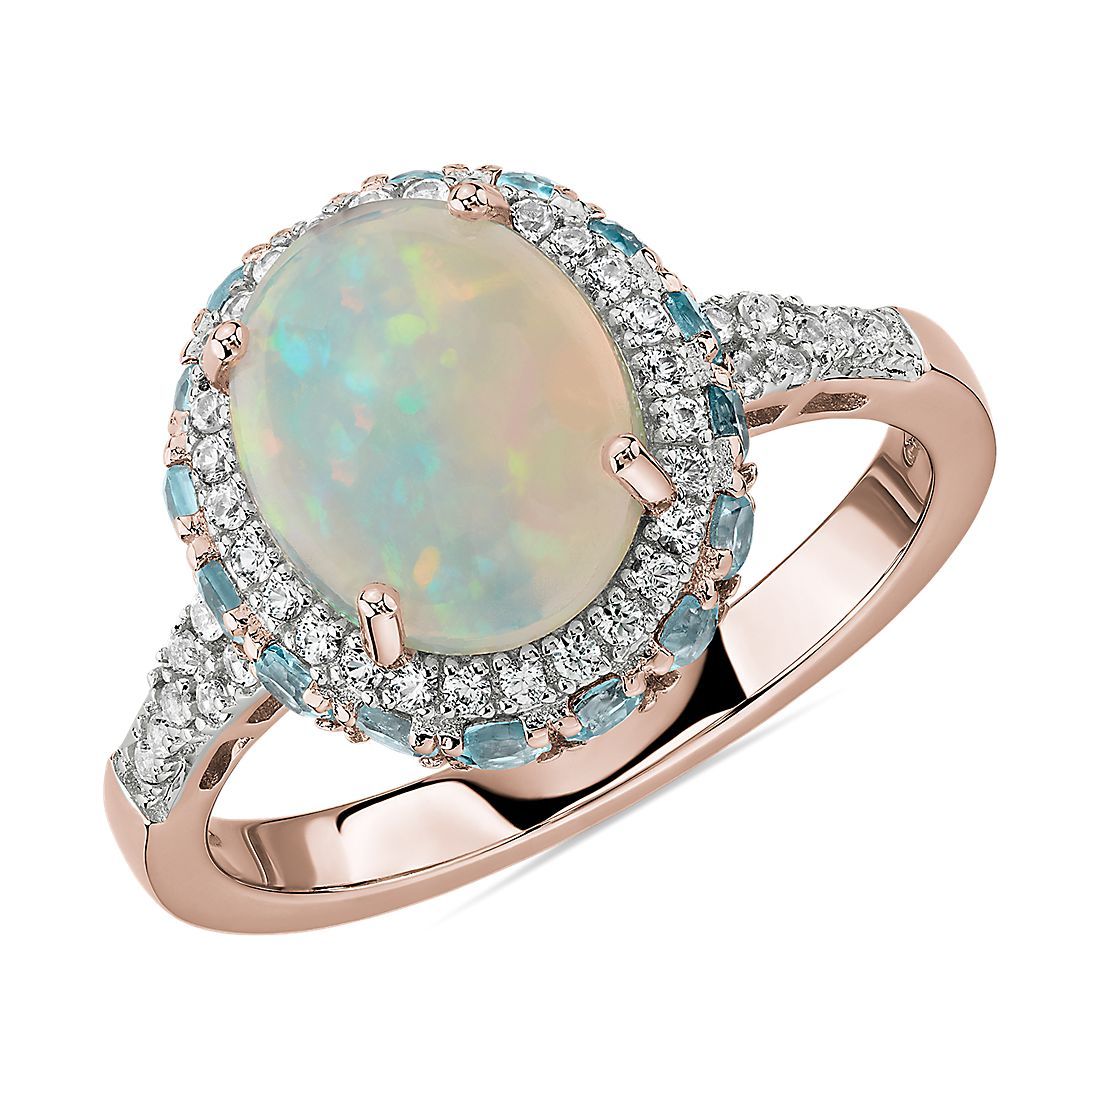 Oval Opal and Swiss Blue Topaz Halo Ring in 14k Rose Gold | Blue Nile | Blue Nile